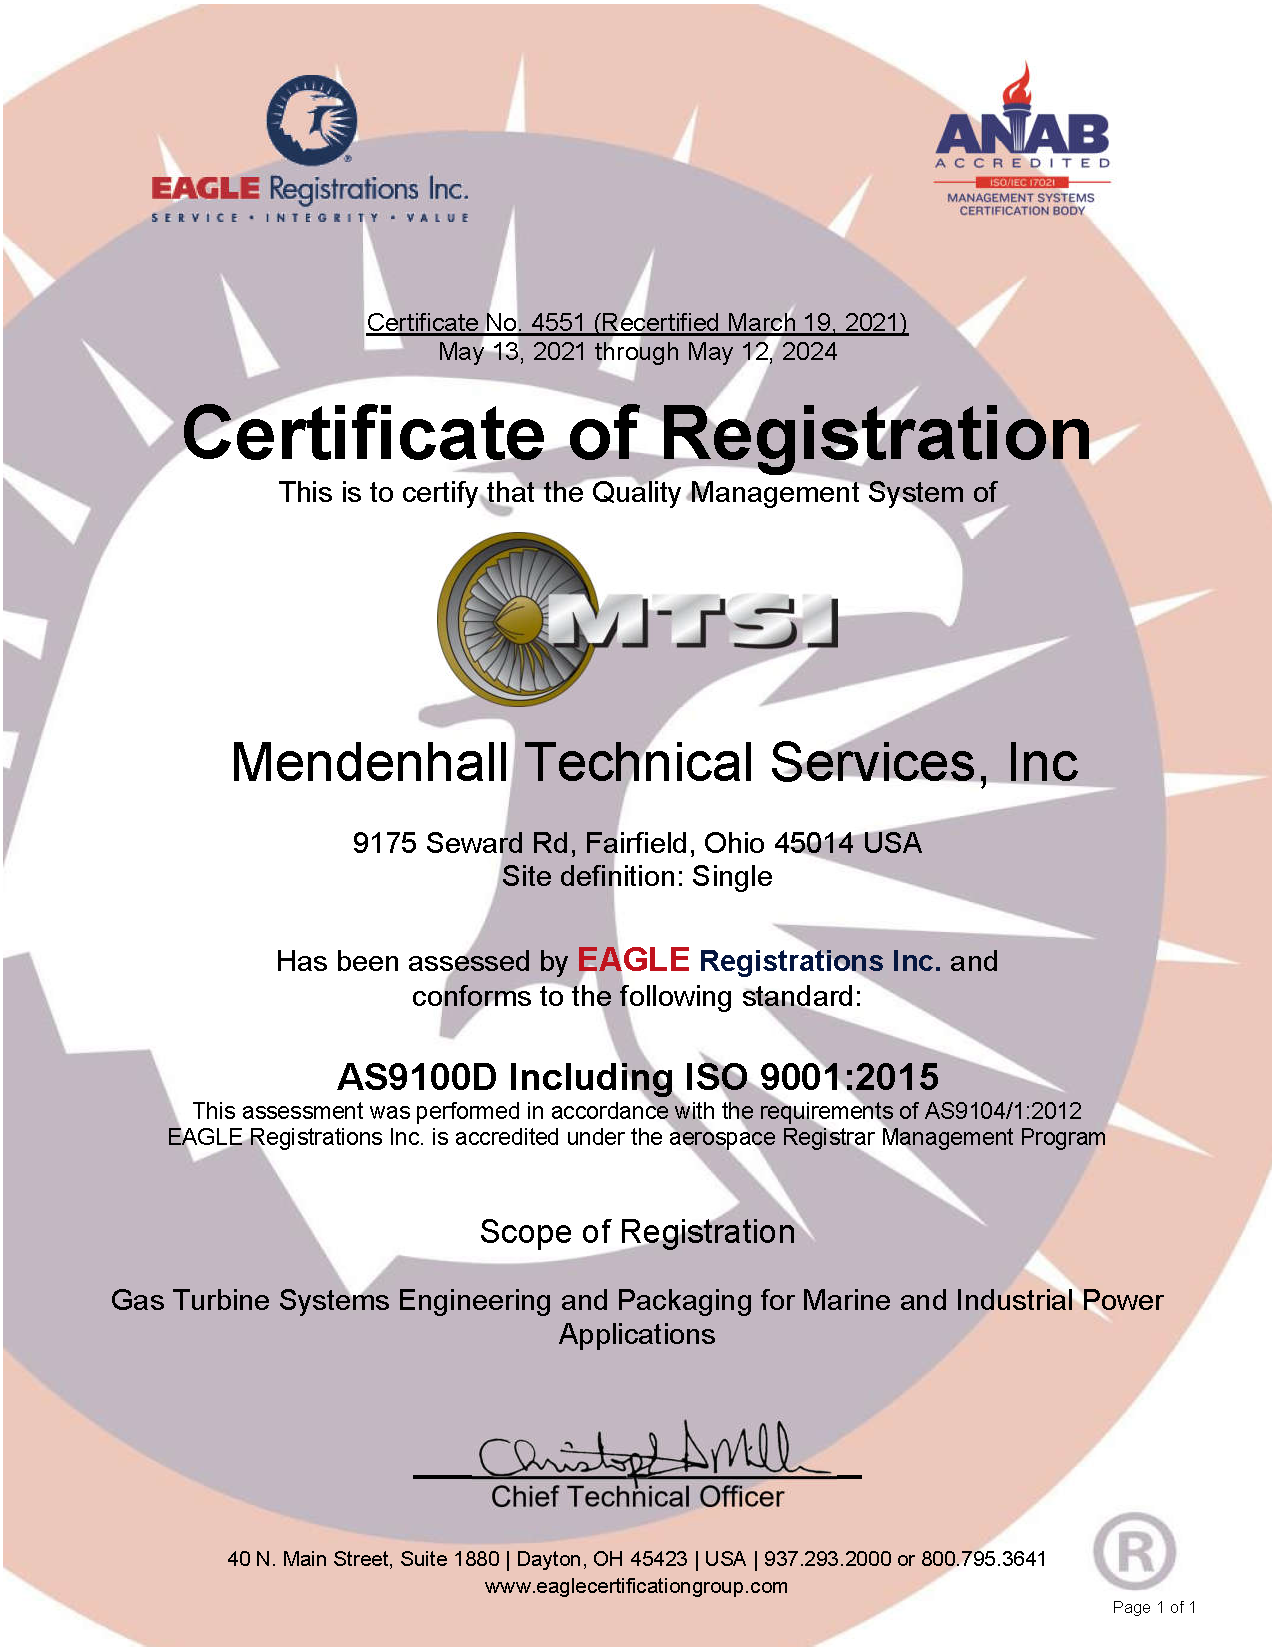 AS9100D-ISO 9001:2015 Certification